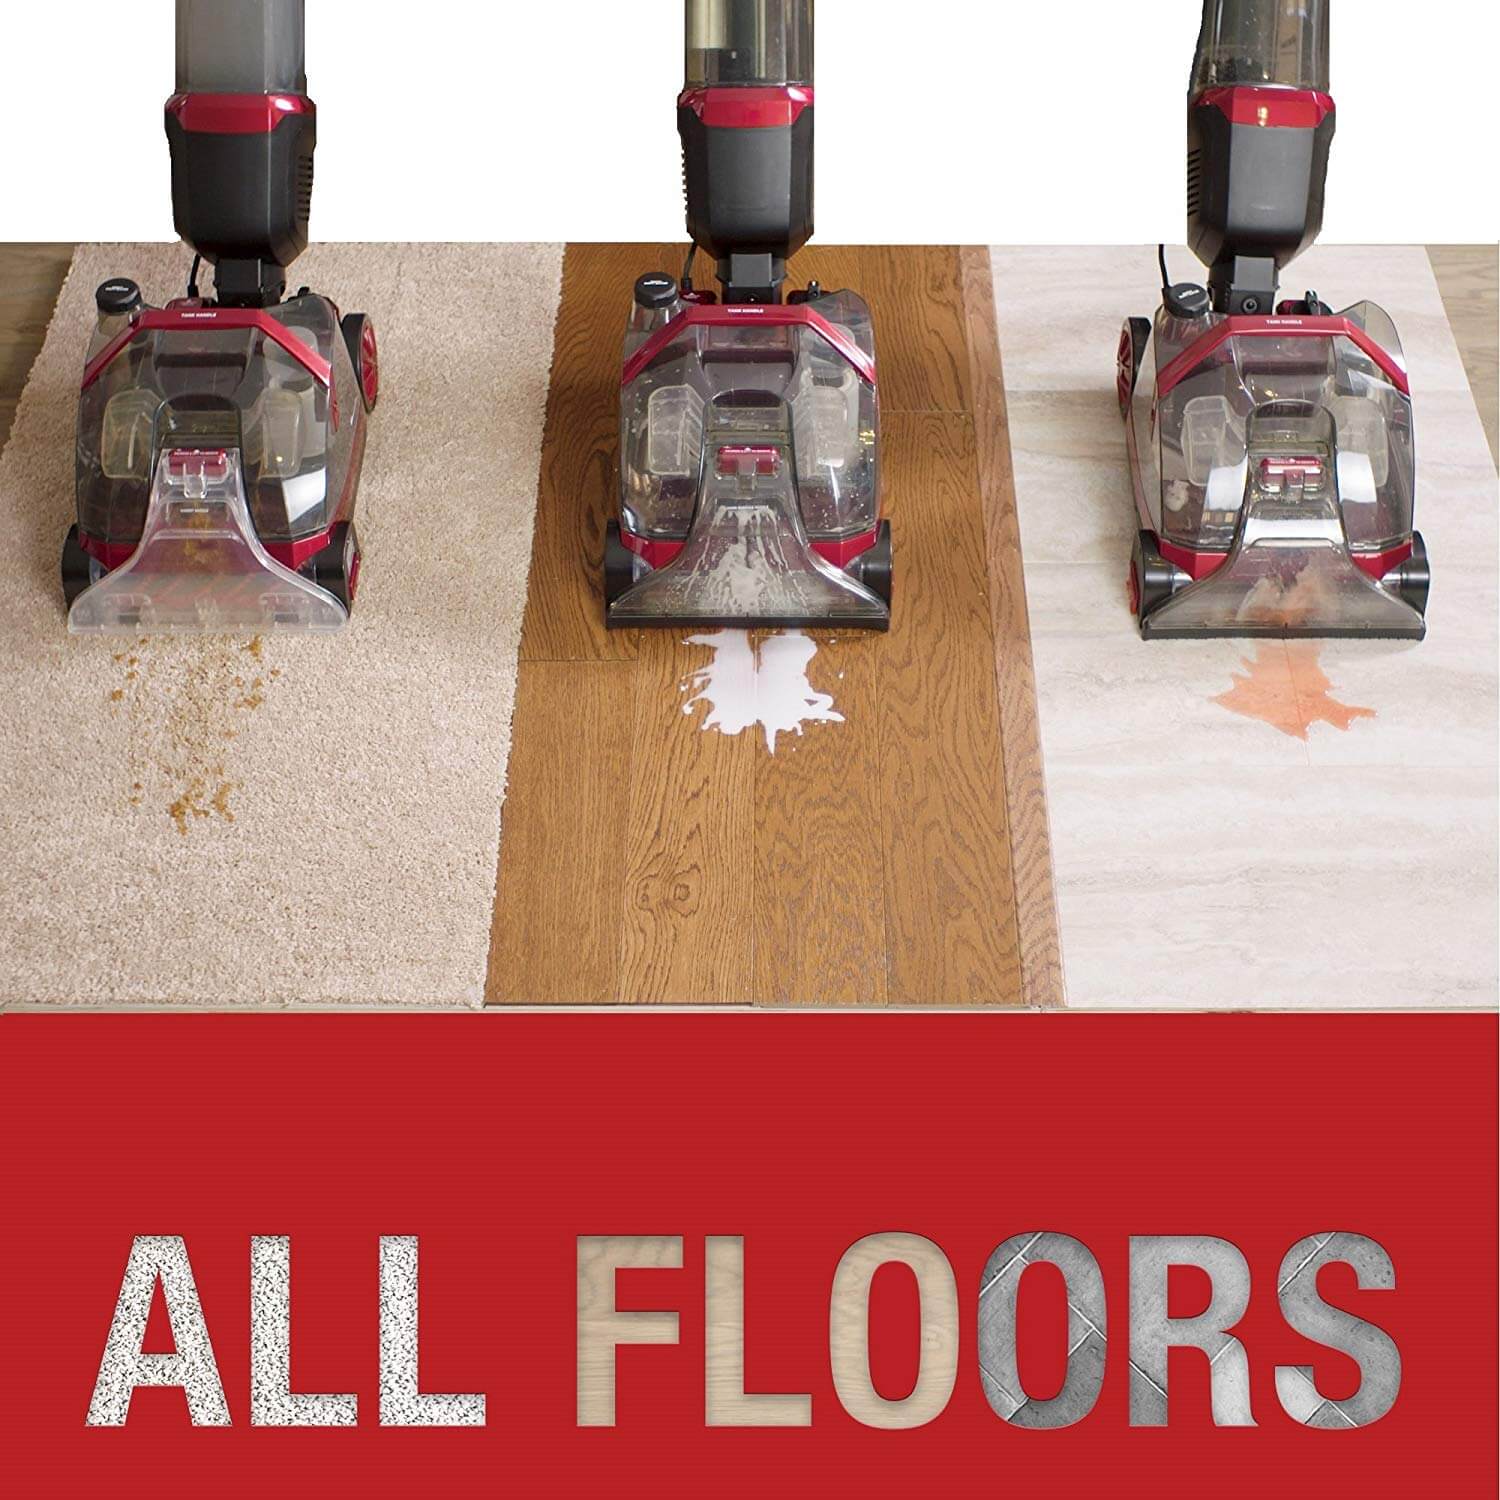 Flexclean All In One Floor Cleaner, Can You Steam Clean Area Rugs On Hardwood Floors